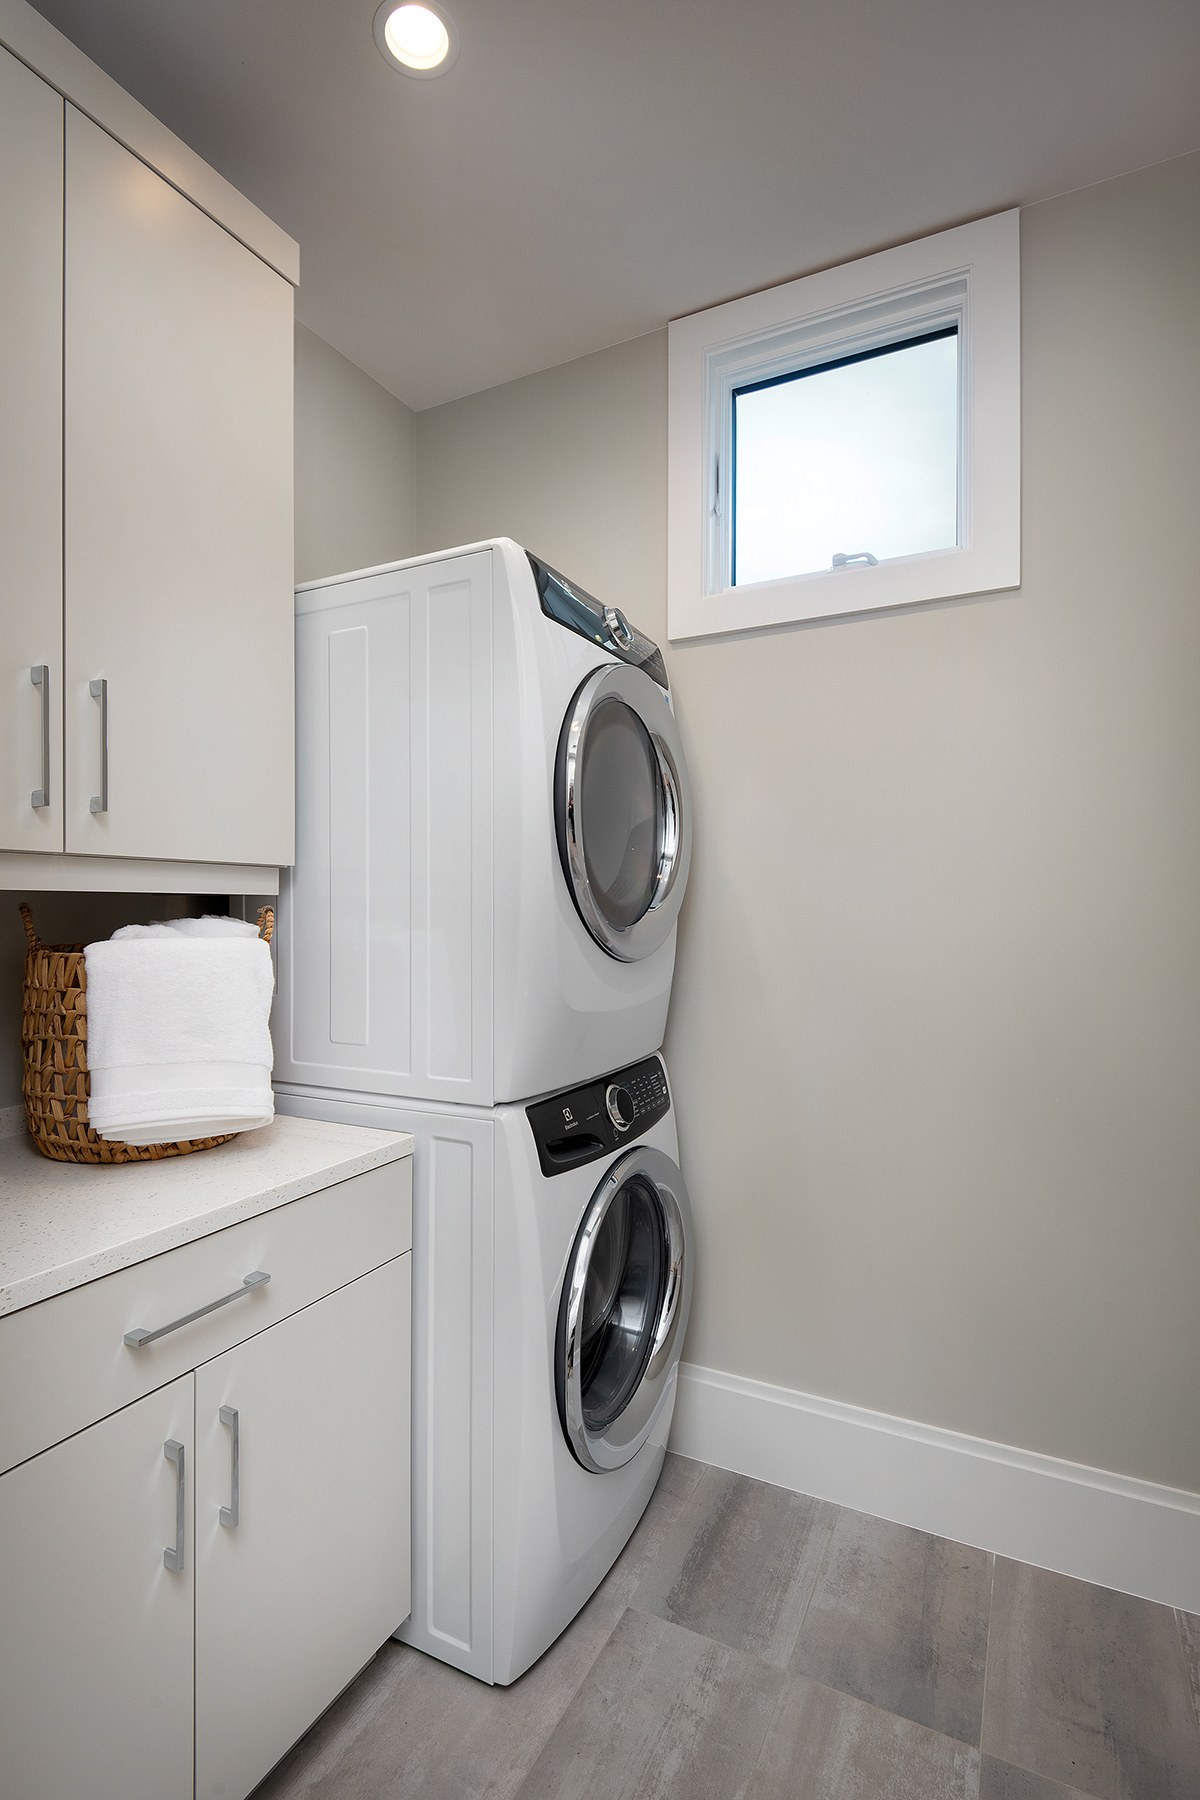 Talis Park: View on View on Laundry room